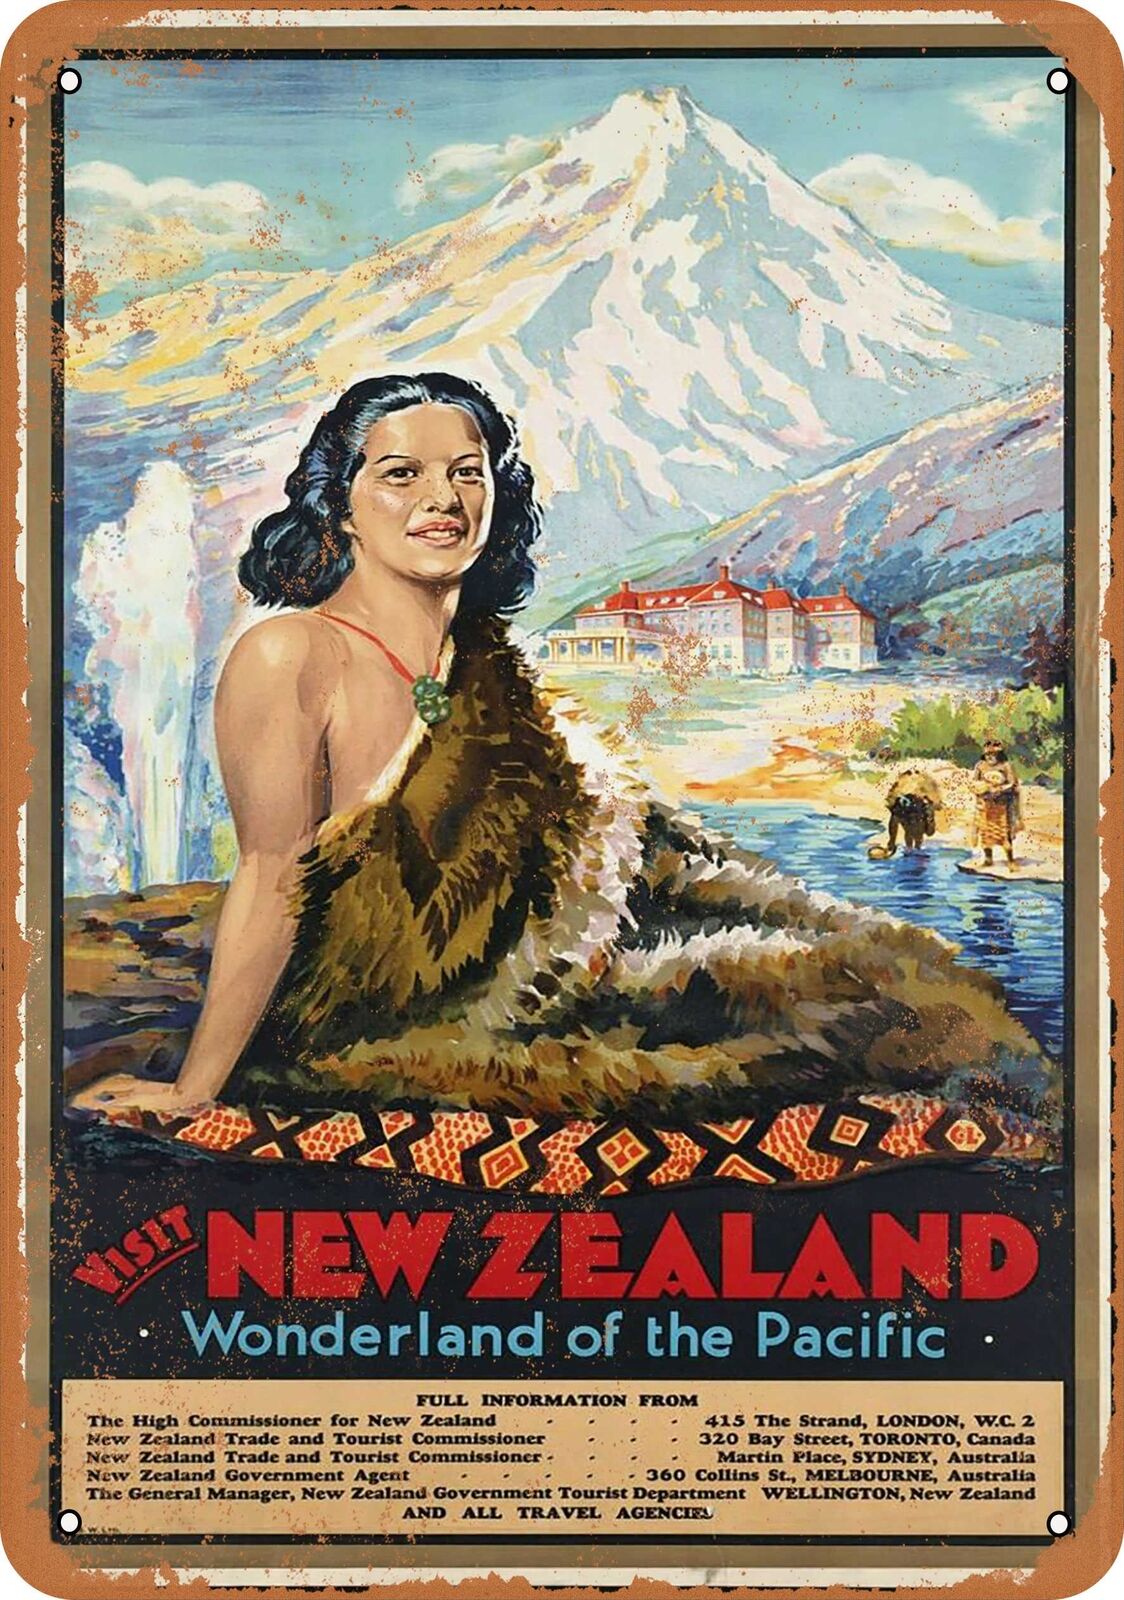 Metal Sign - Visit New Zealand - Vintage Look Reproduction